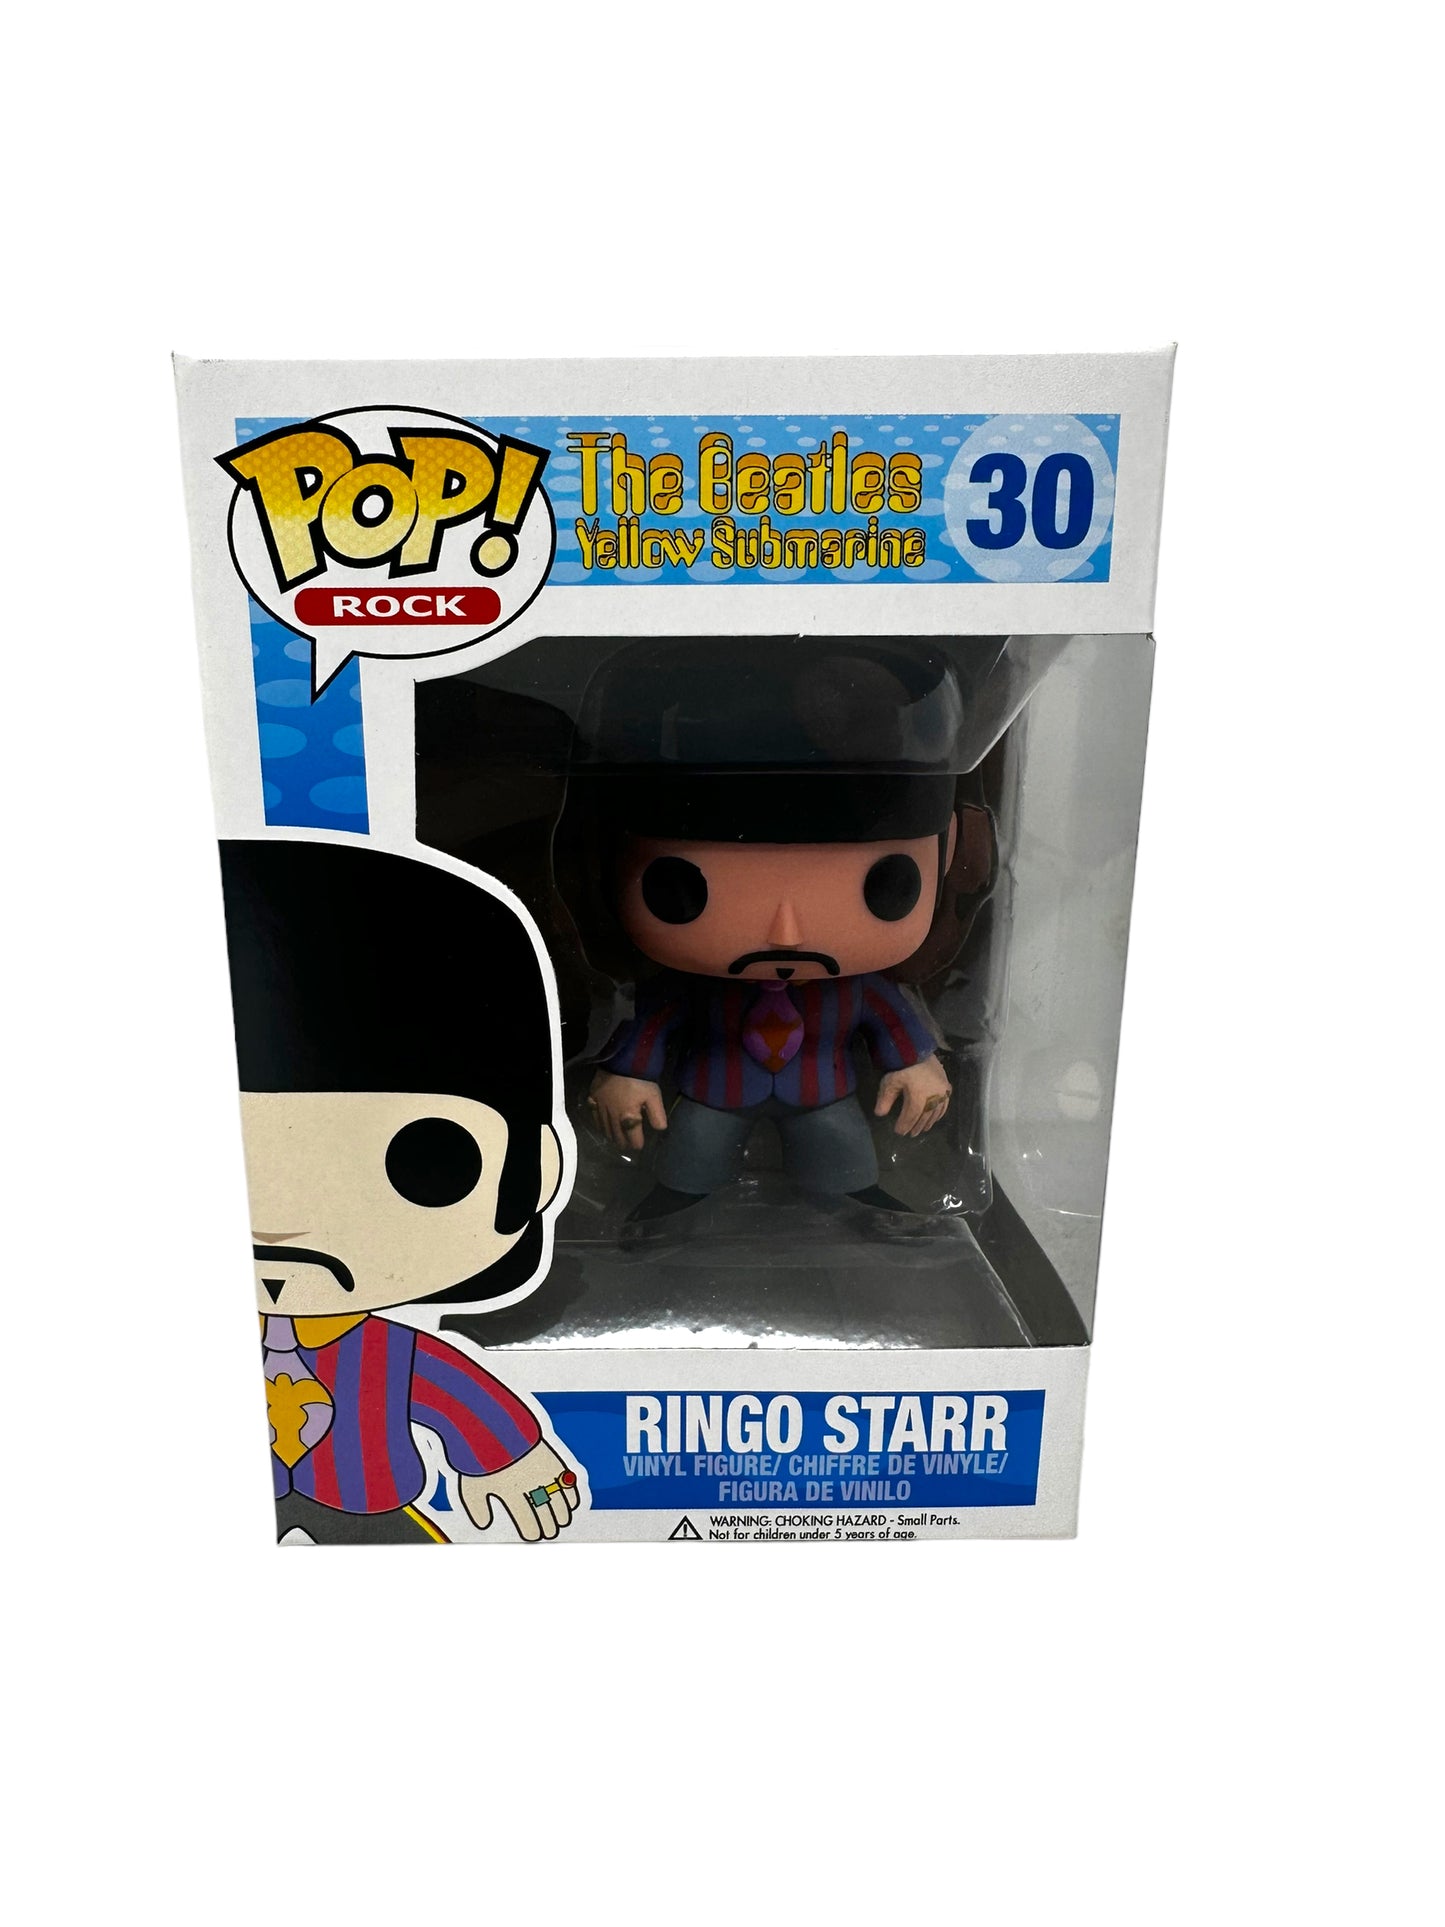 Sold 9/29 2015 Ringo Starr 30 (The Beetles)